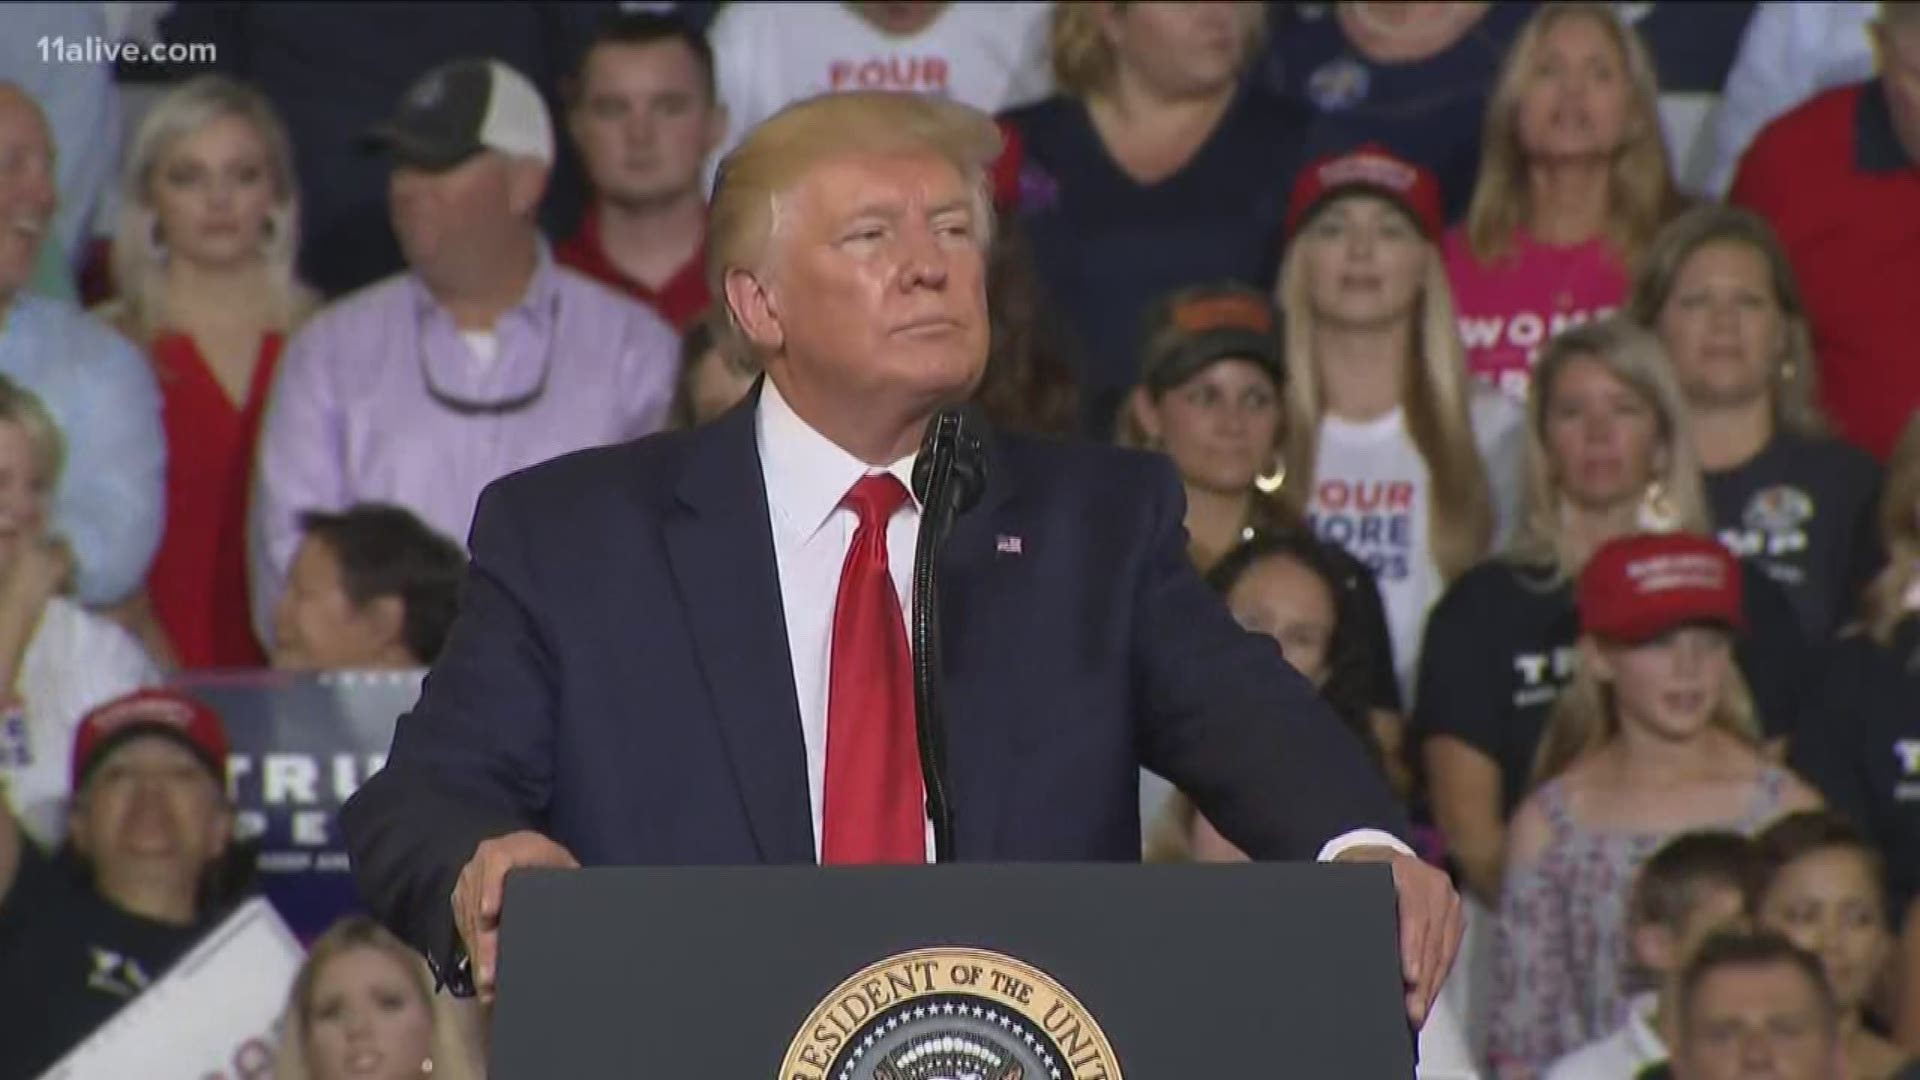 President Trump is now suggesting that maybe his supporters went to far with the chanting.